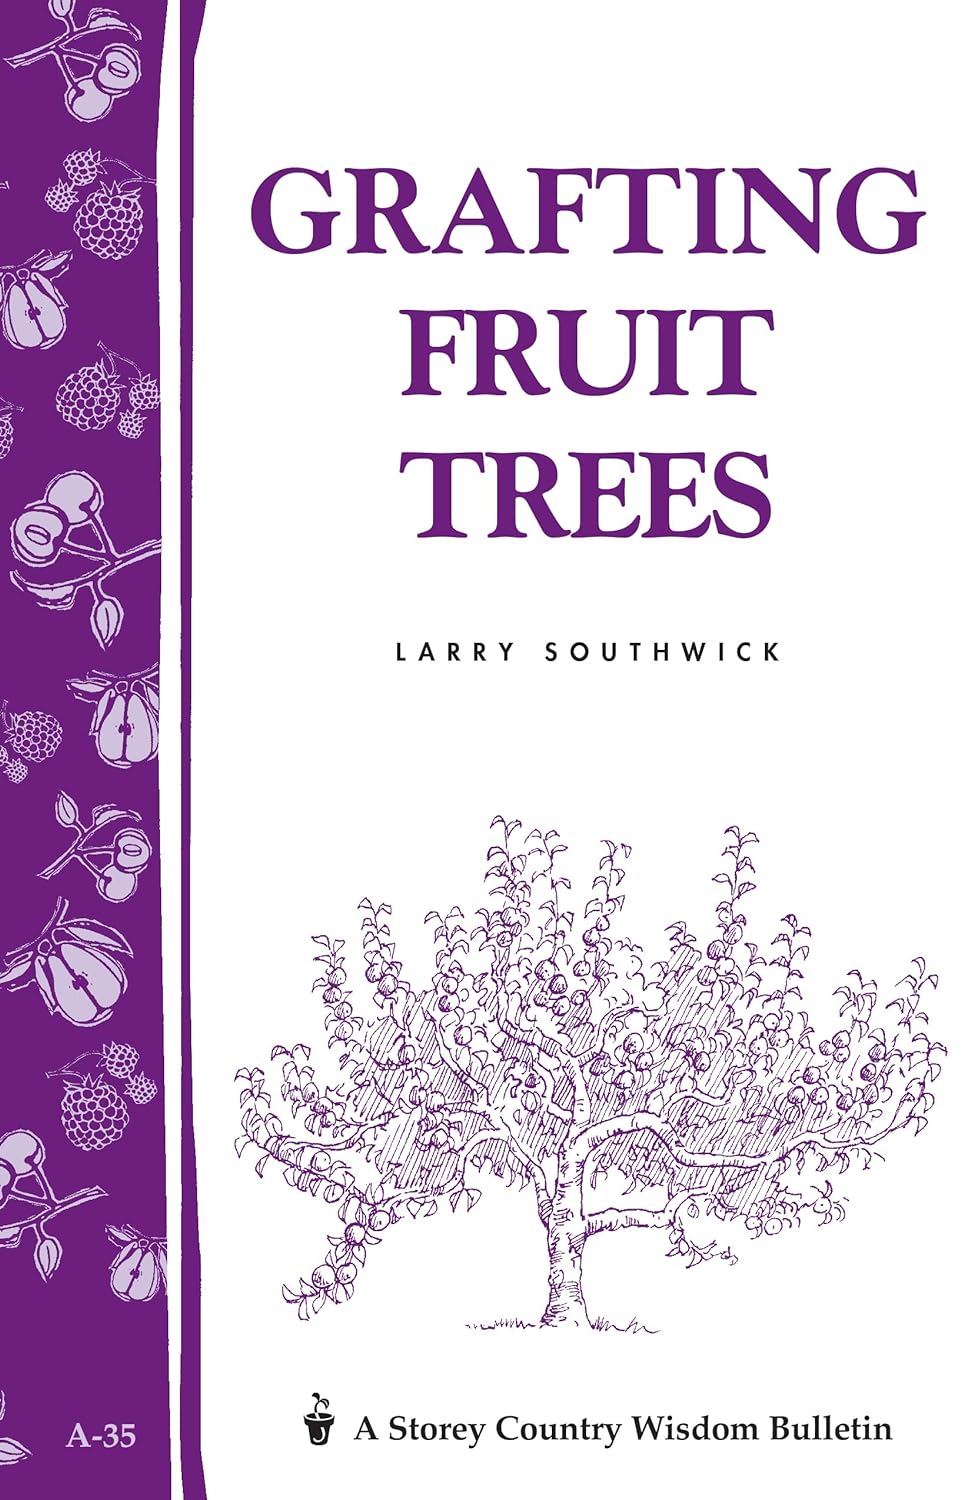 Storey's Country Wisdom Bulletin: Grafting Fruit Trees - by Larry Southwick